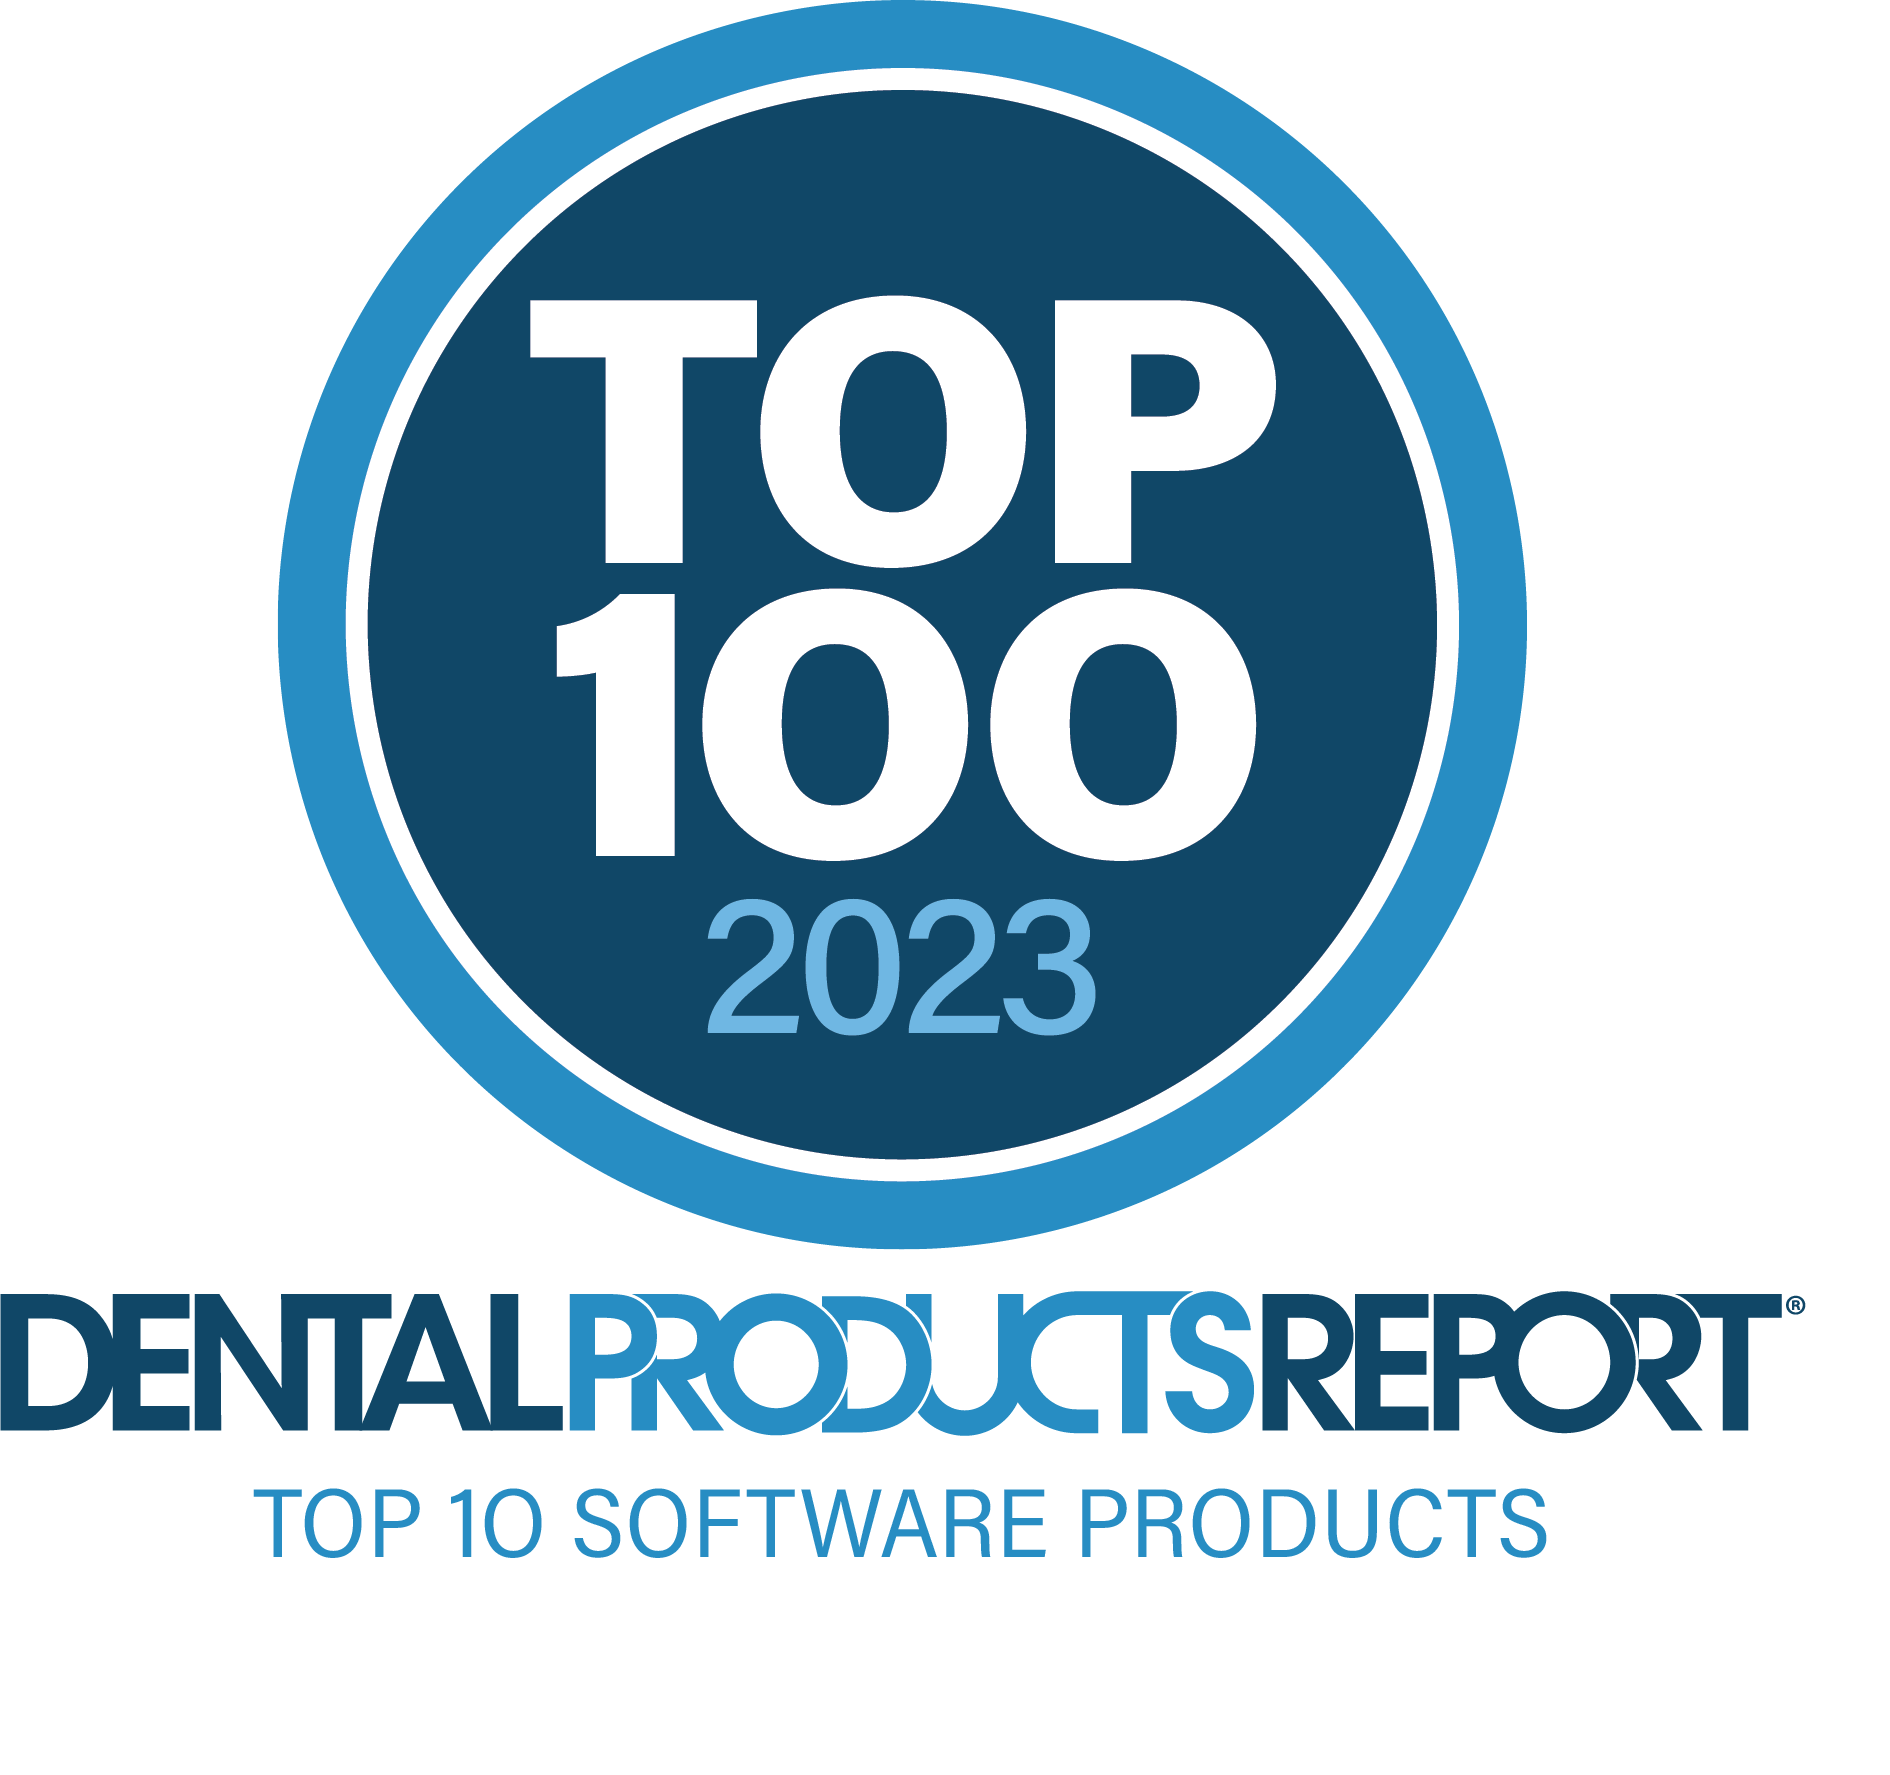 DPR Top 100: The Top 10 Software Products of 2023